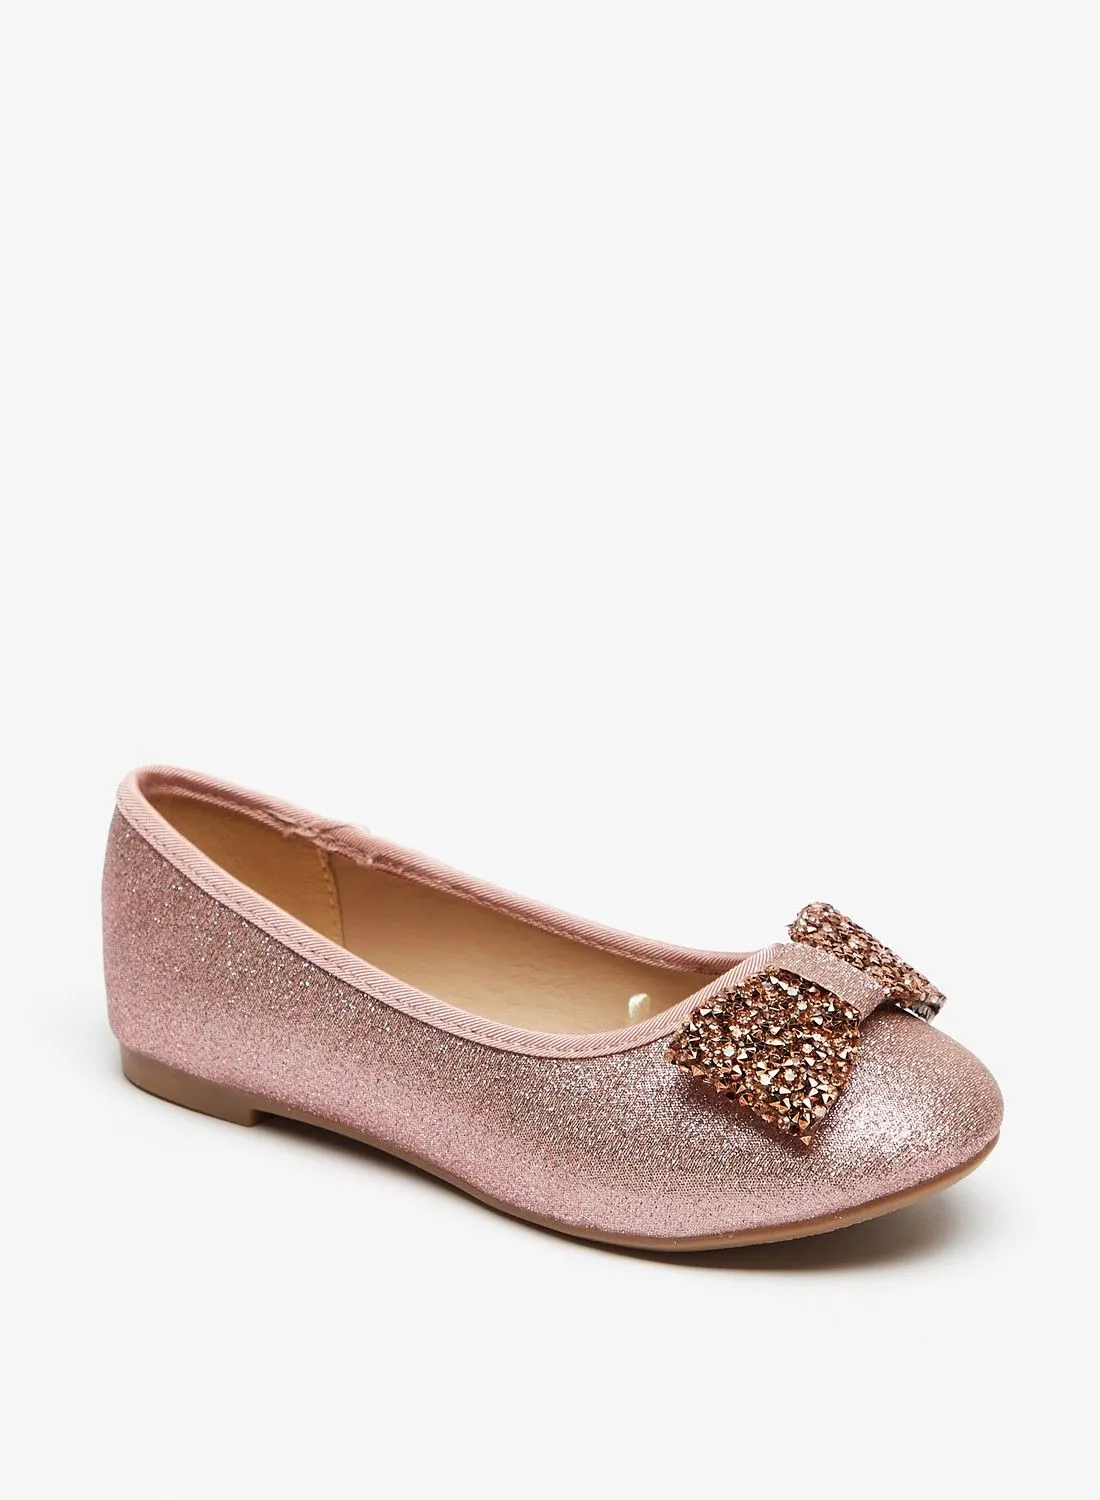 Flora Bella Bow Accent Slip On Round Toe Ballerina Shoes